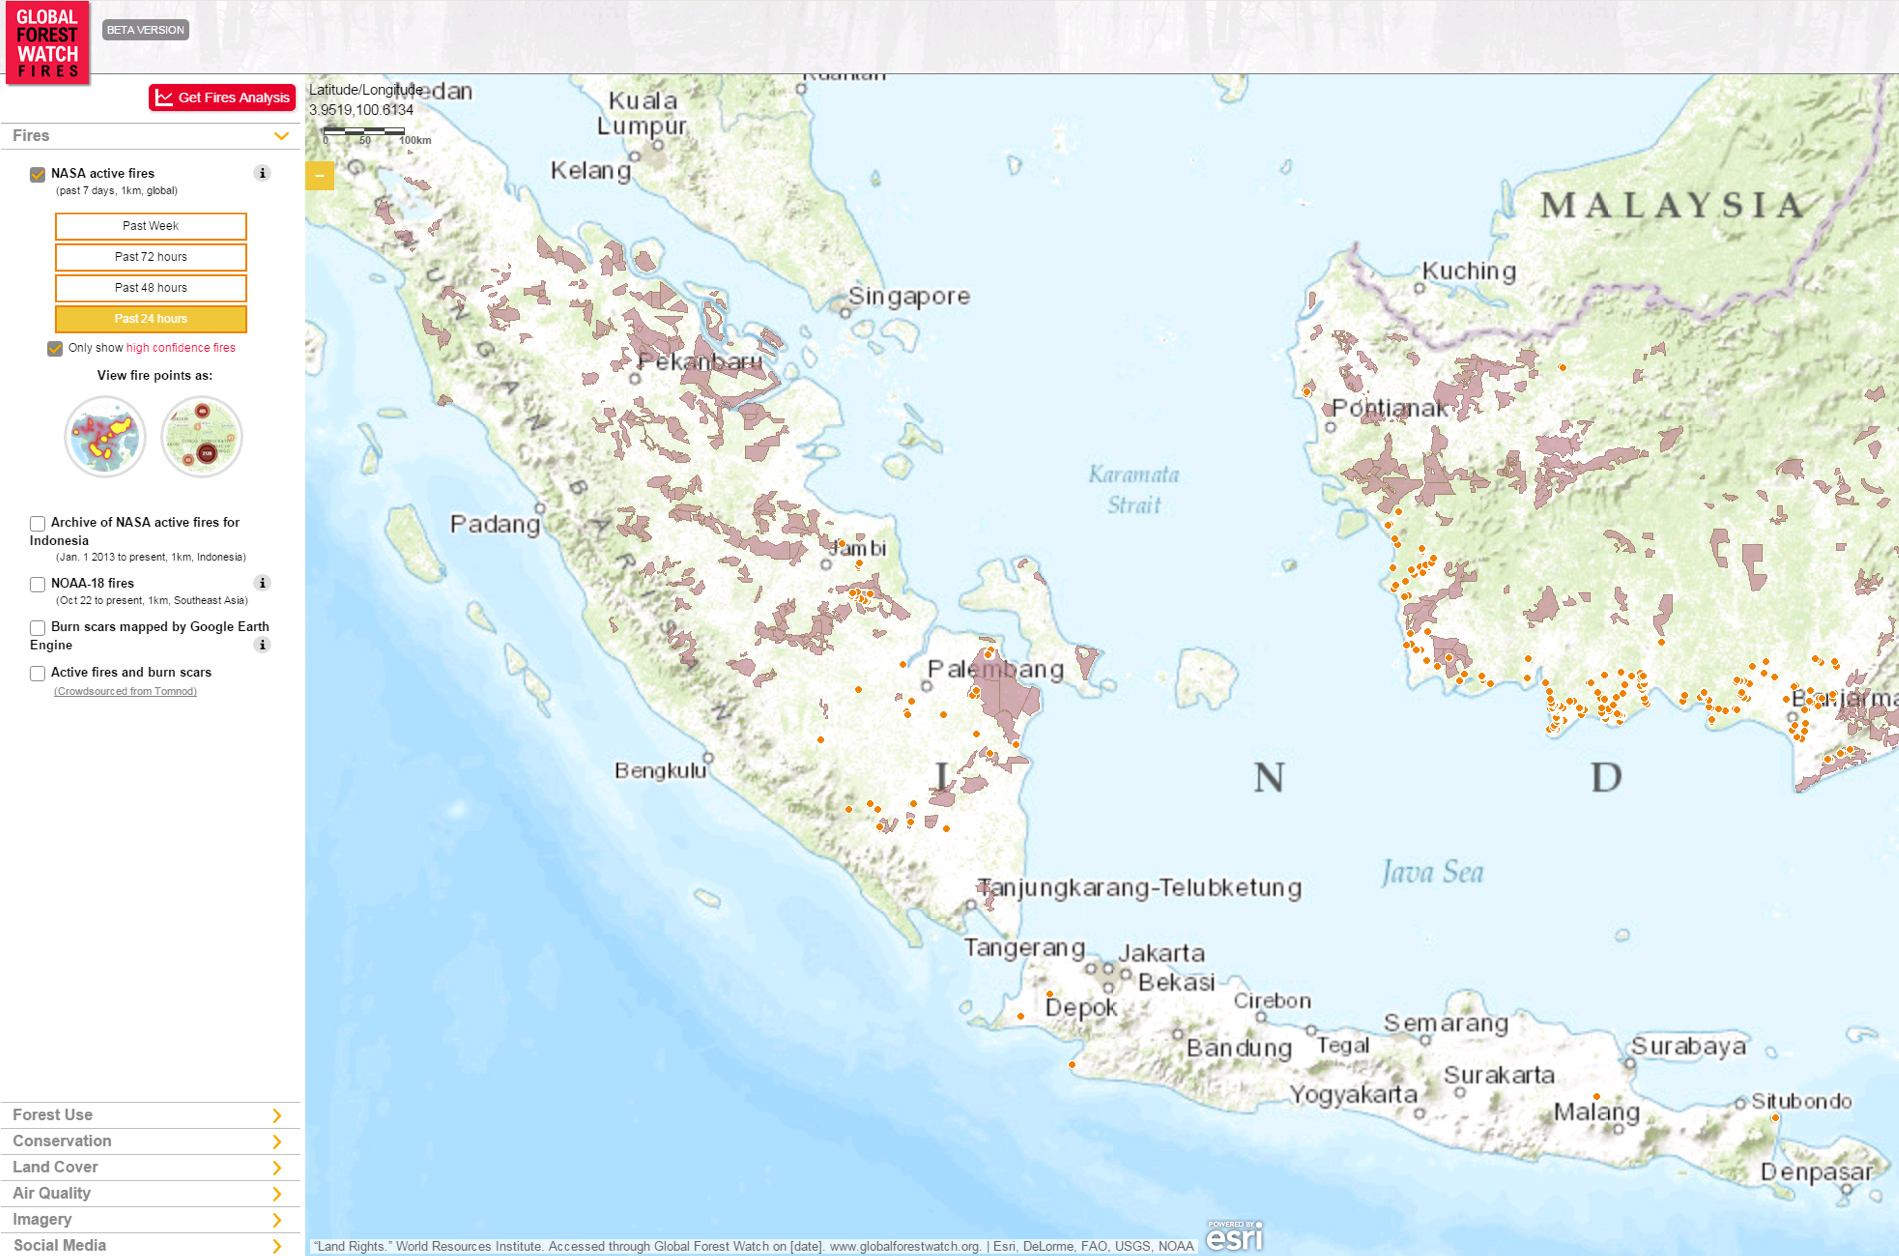 WRI-16 September 2015 - Hotspots are mainly located in South Sumatra and Kalimantan. 